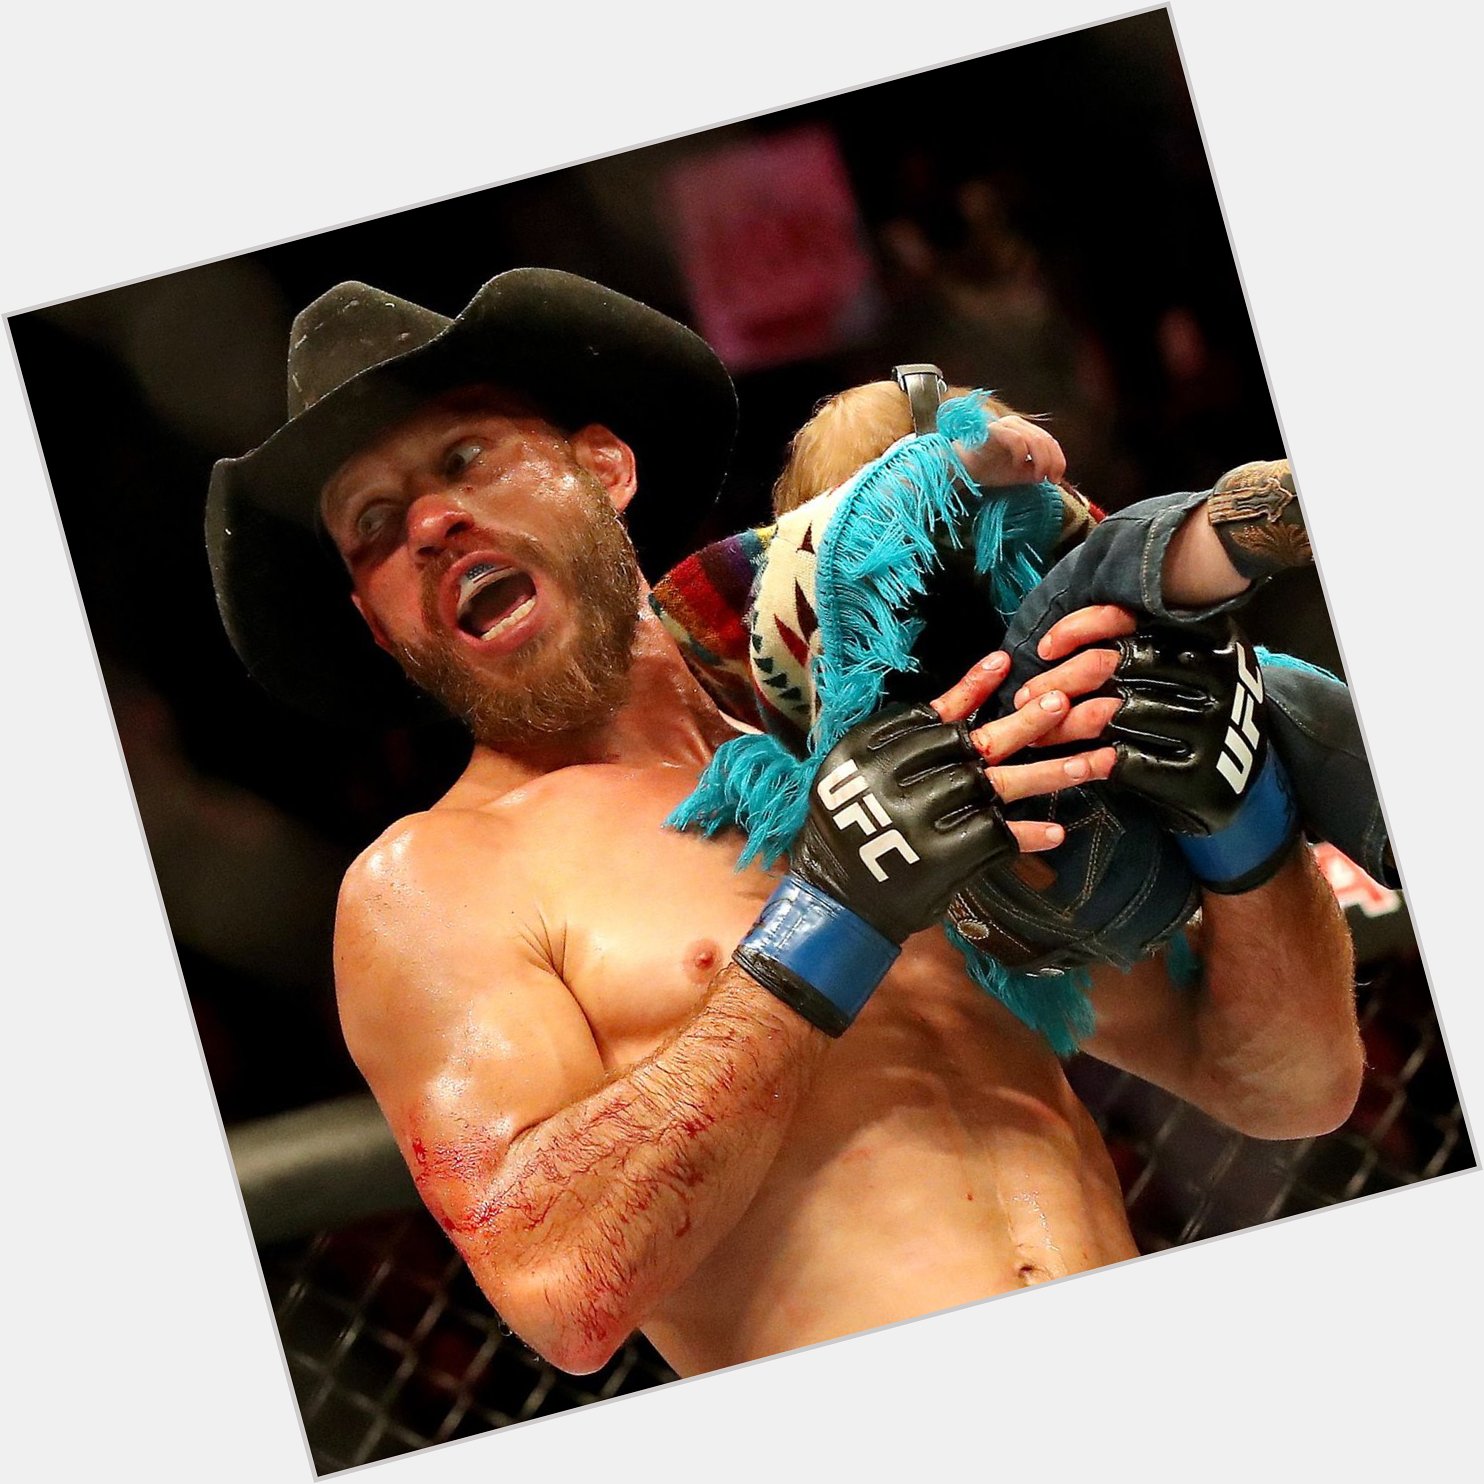  Happy 39th birthday to UFC legend and future hall of famer Donald Cerrone!  